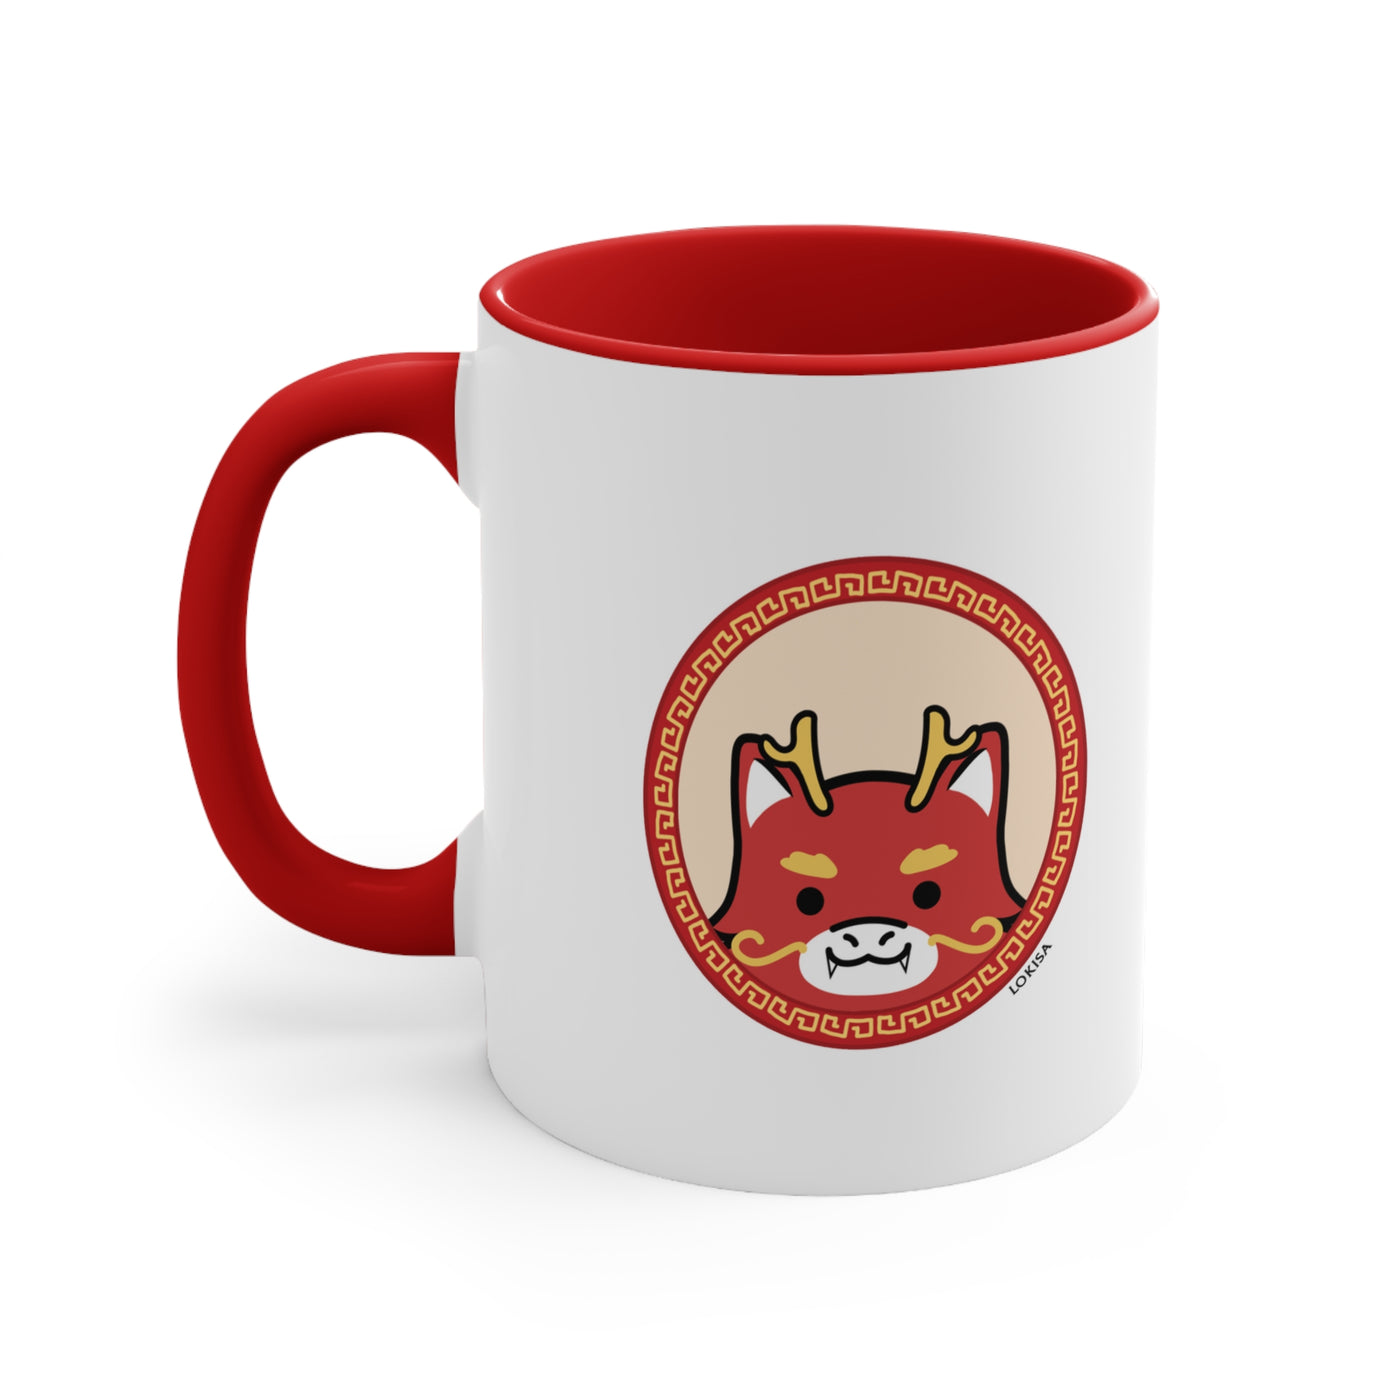 Bow for the Bao Red Dragon Mug - Red